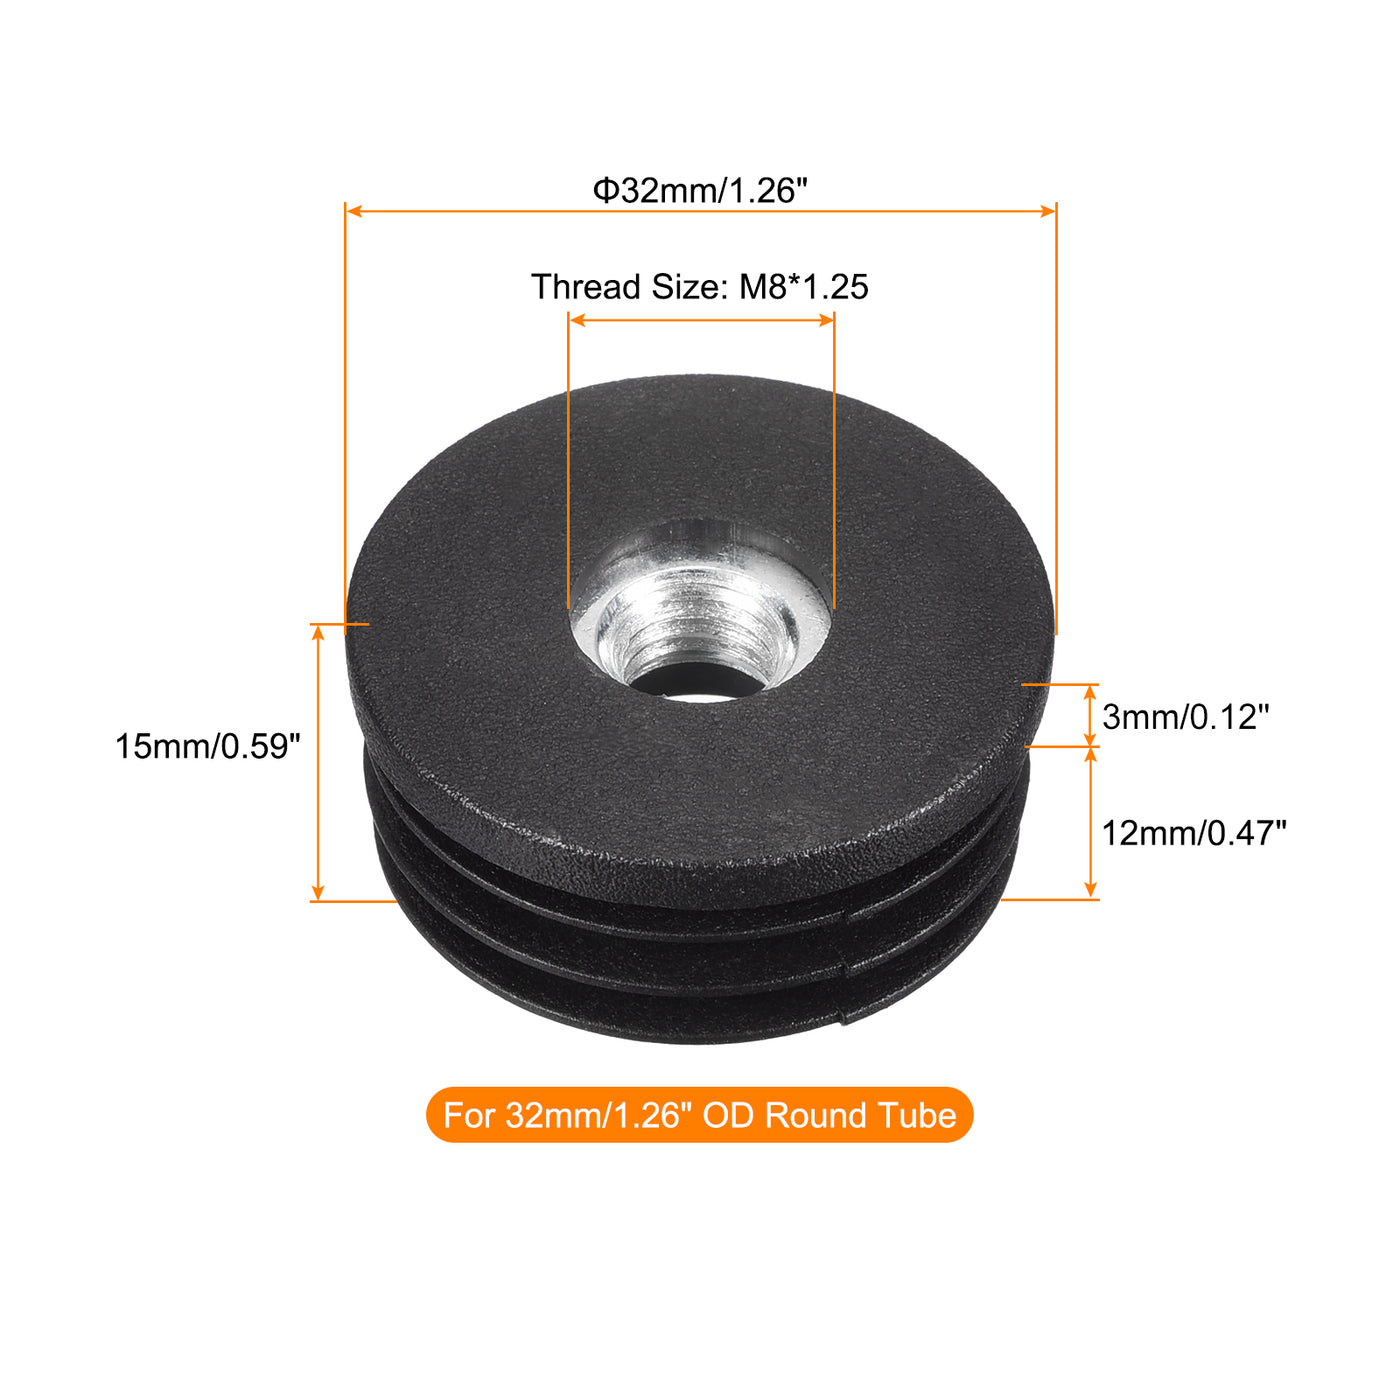 uxcell Uxcell 24Pcs 32mm/1.26" Caster Insert with Thread, Round M8 Thread for Furniture